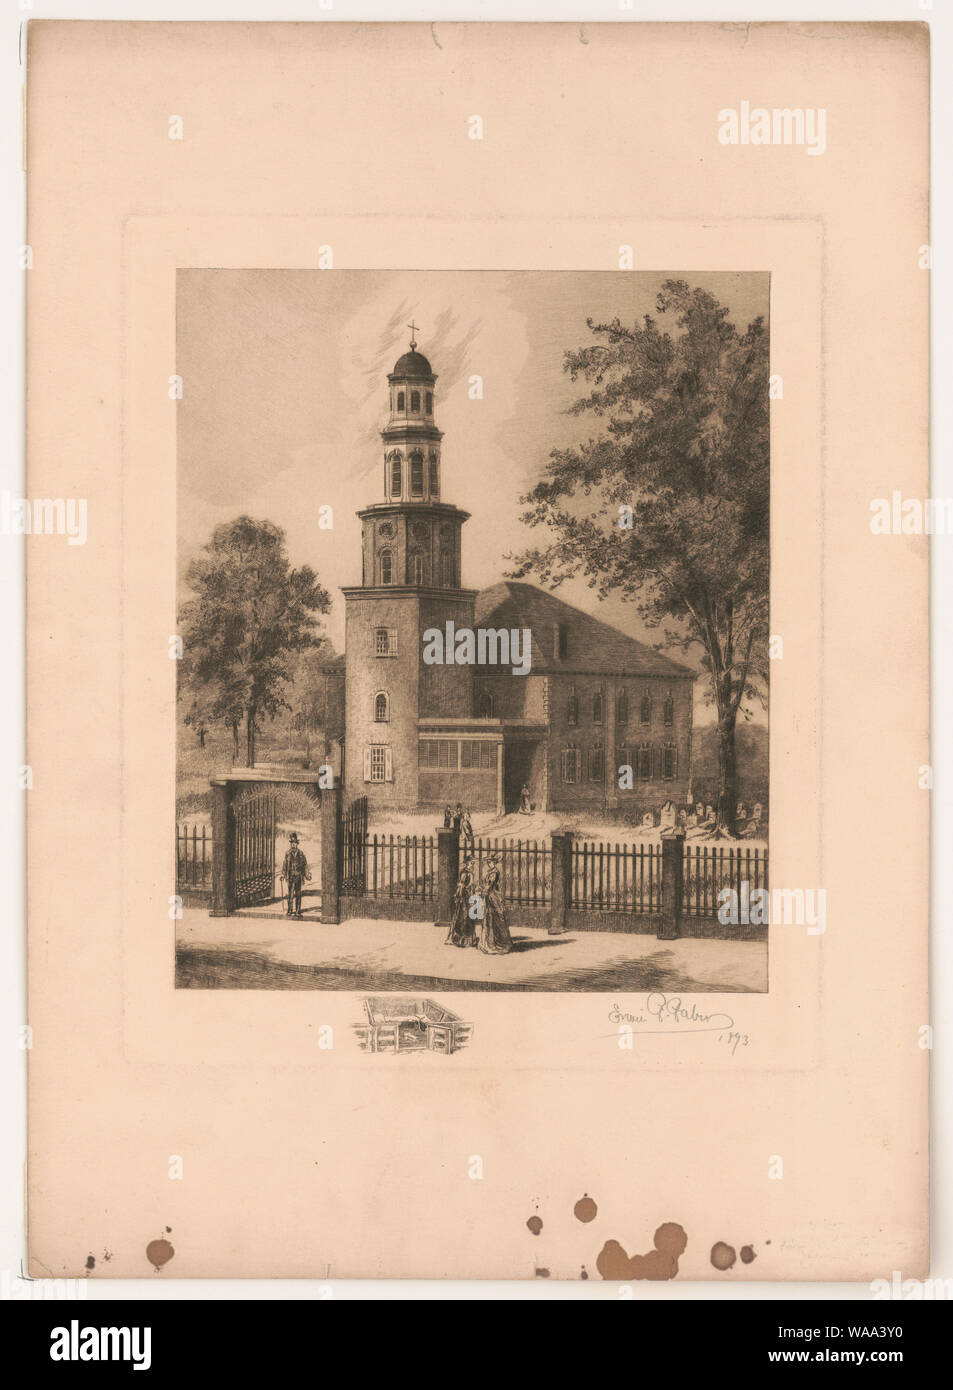 Christ Church Alex., Va Abstract: Print shows an exterior view of Christ Church in Alexandria, Virginia, with fence and gate along sidewalk in the foreground and a small cemetery beneath a tree on the right. Also shows two women standing on the sidewalk and a man standing at the gate, other people between the gate and the church, and a woman standing at the entrance to the church. Includes a remarque at bottom center showing the interior of a pew. Stock Photo